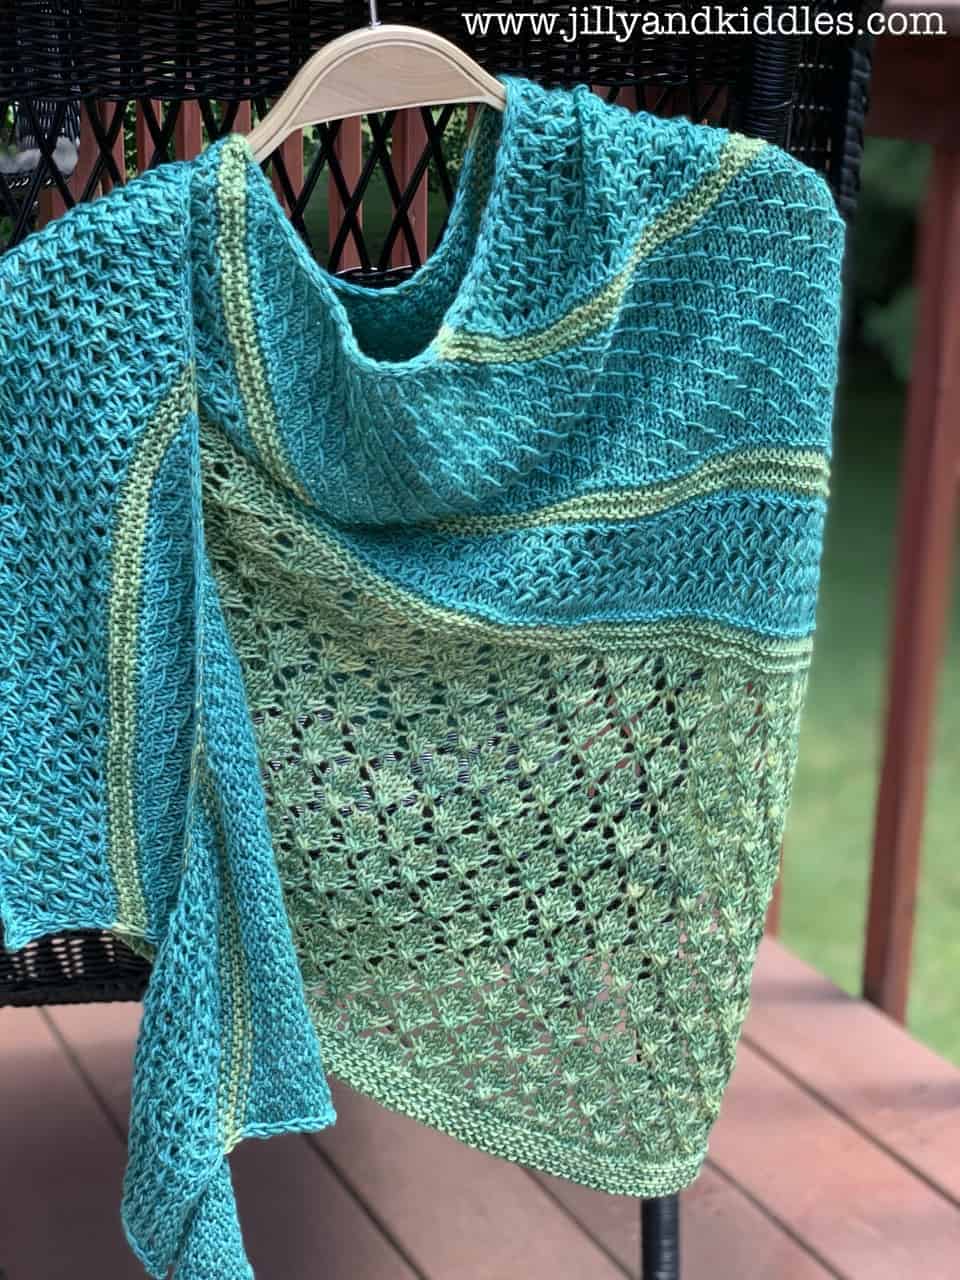 A teal and green lacy and textured shawl.